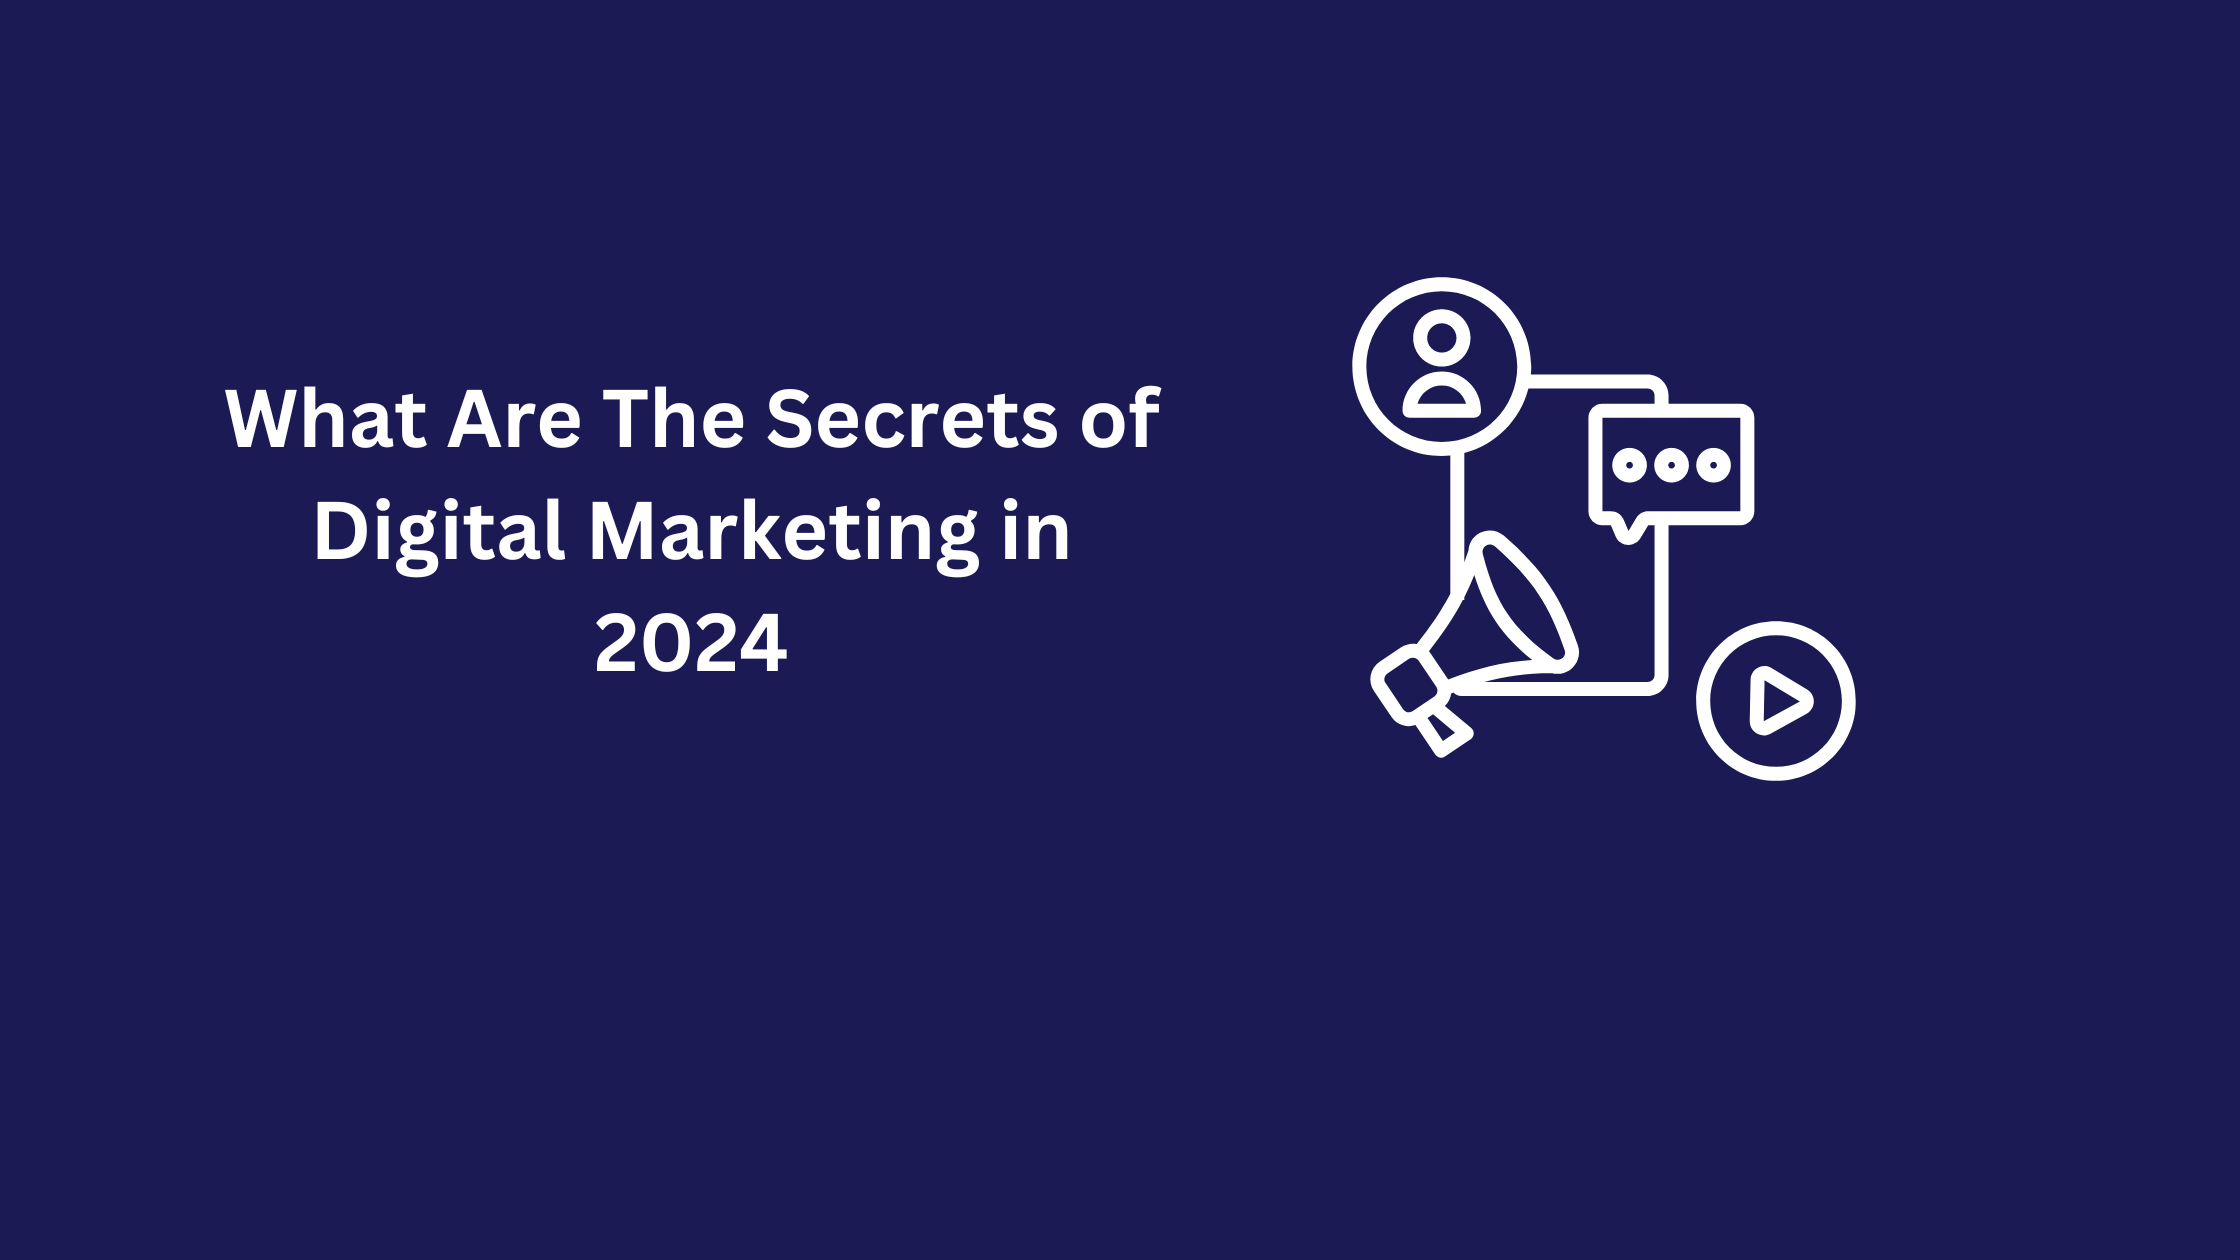 What Are The Secrets of Digital Marketing in 2024